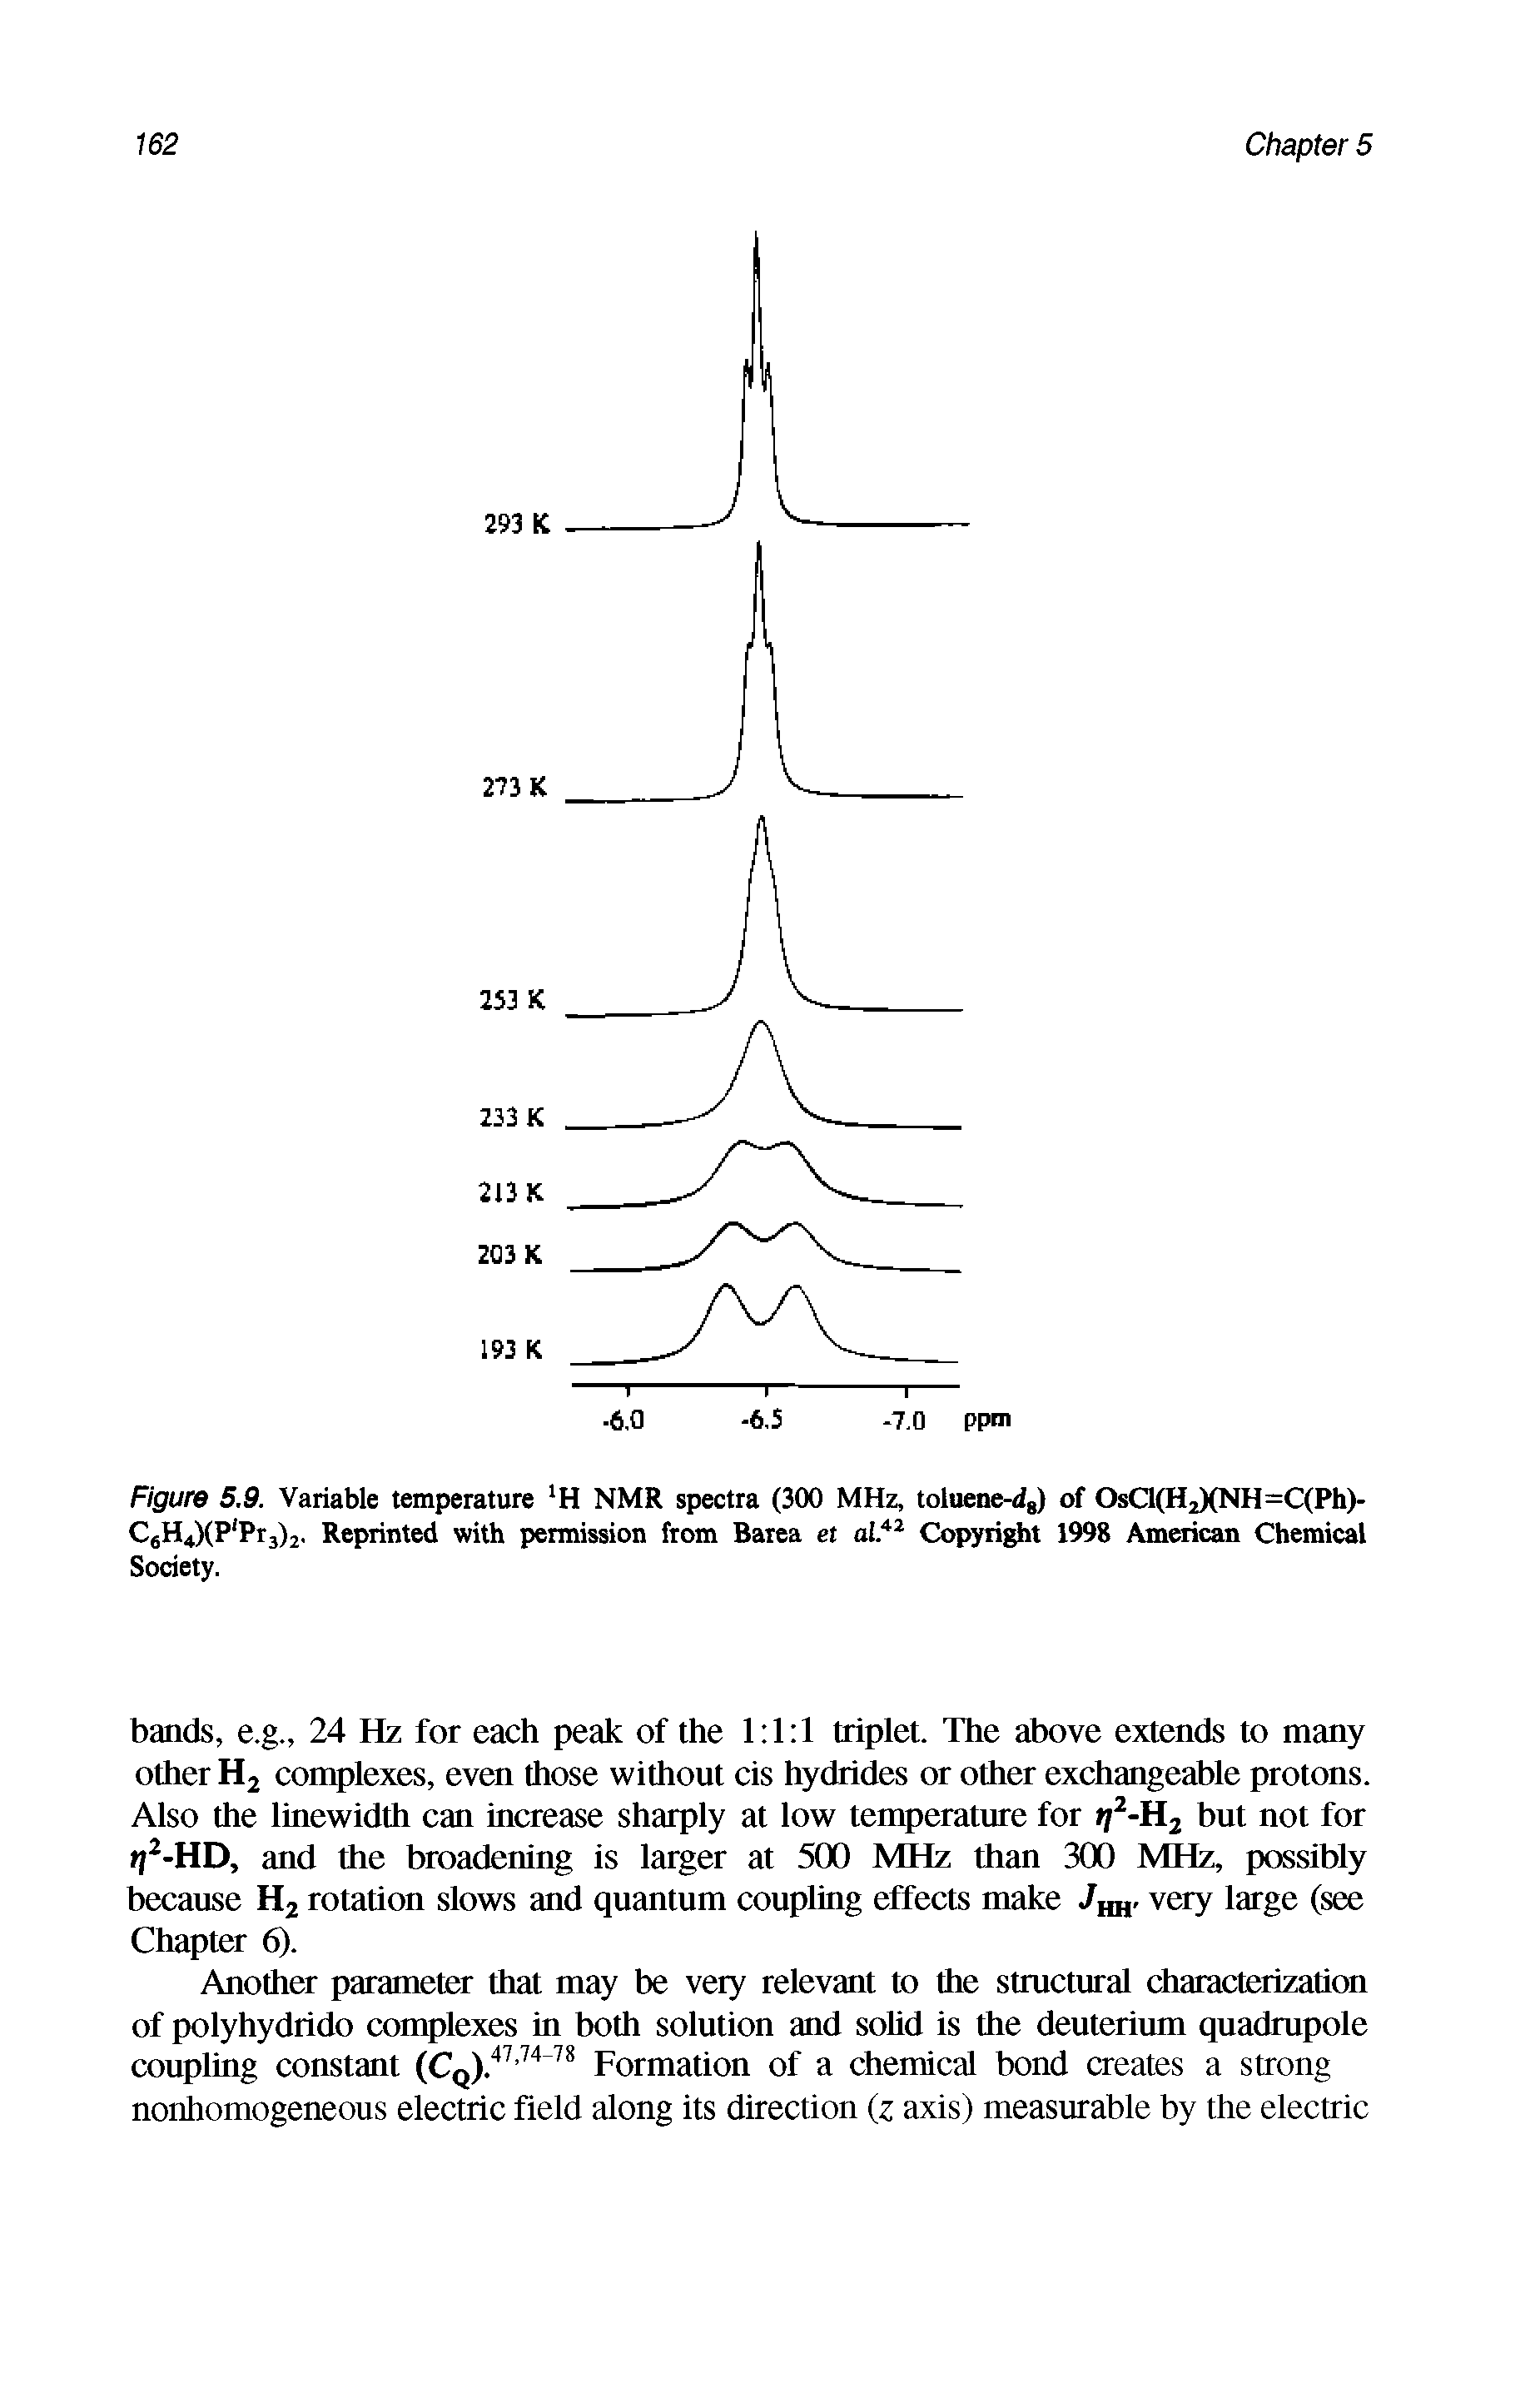 Figure 5.9. Variable temperature H NMR spectra (300 MHz, toluene-tig) of OsClfHjXNH=C(Ph)- )2. Reprinted with permission from Barea et al.42 Copyright 1998 American Chemical Society.